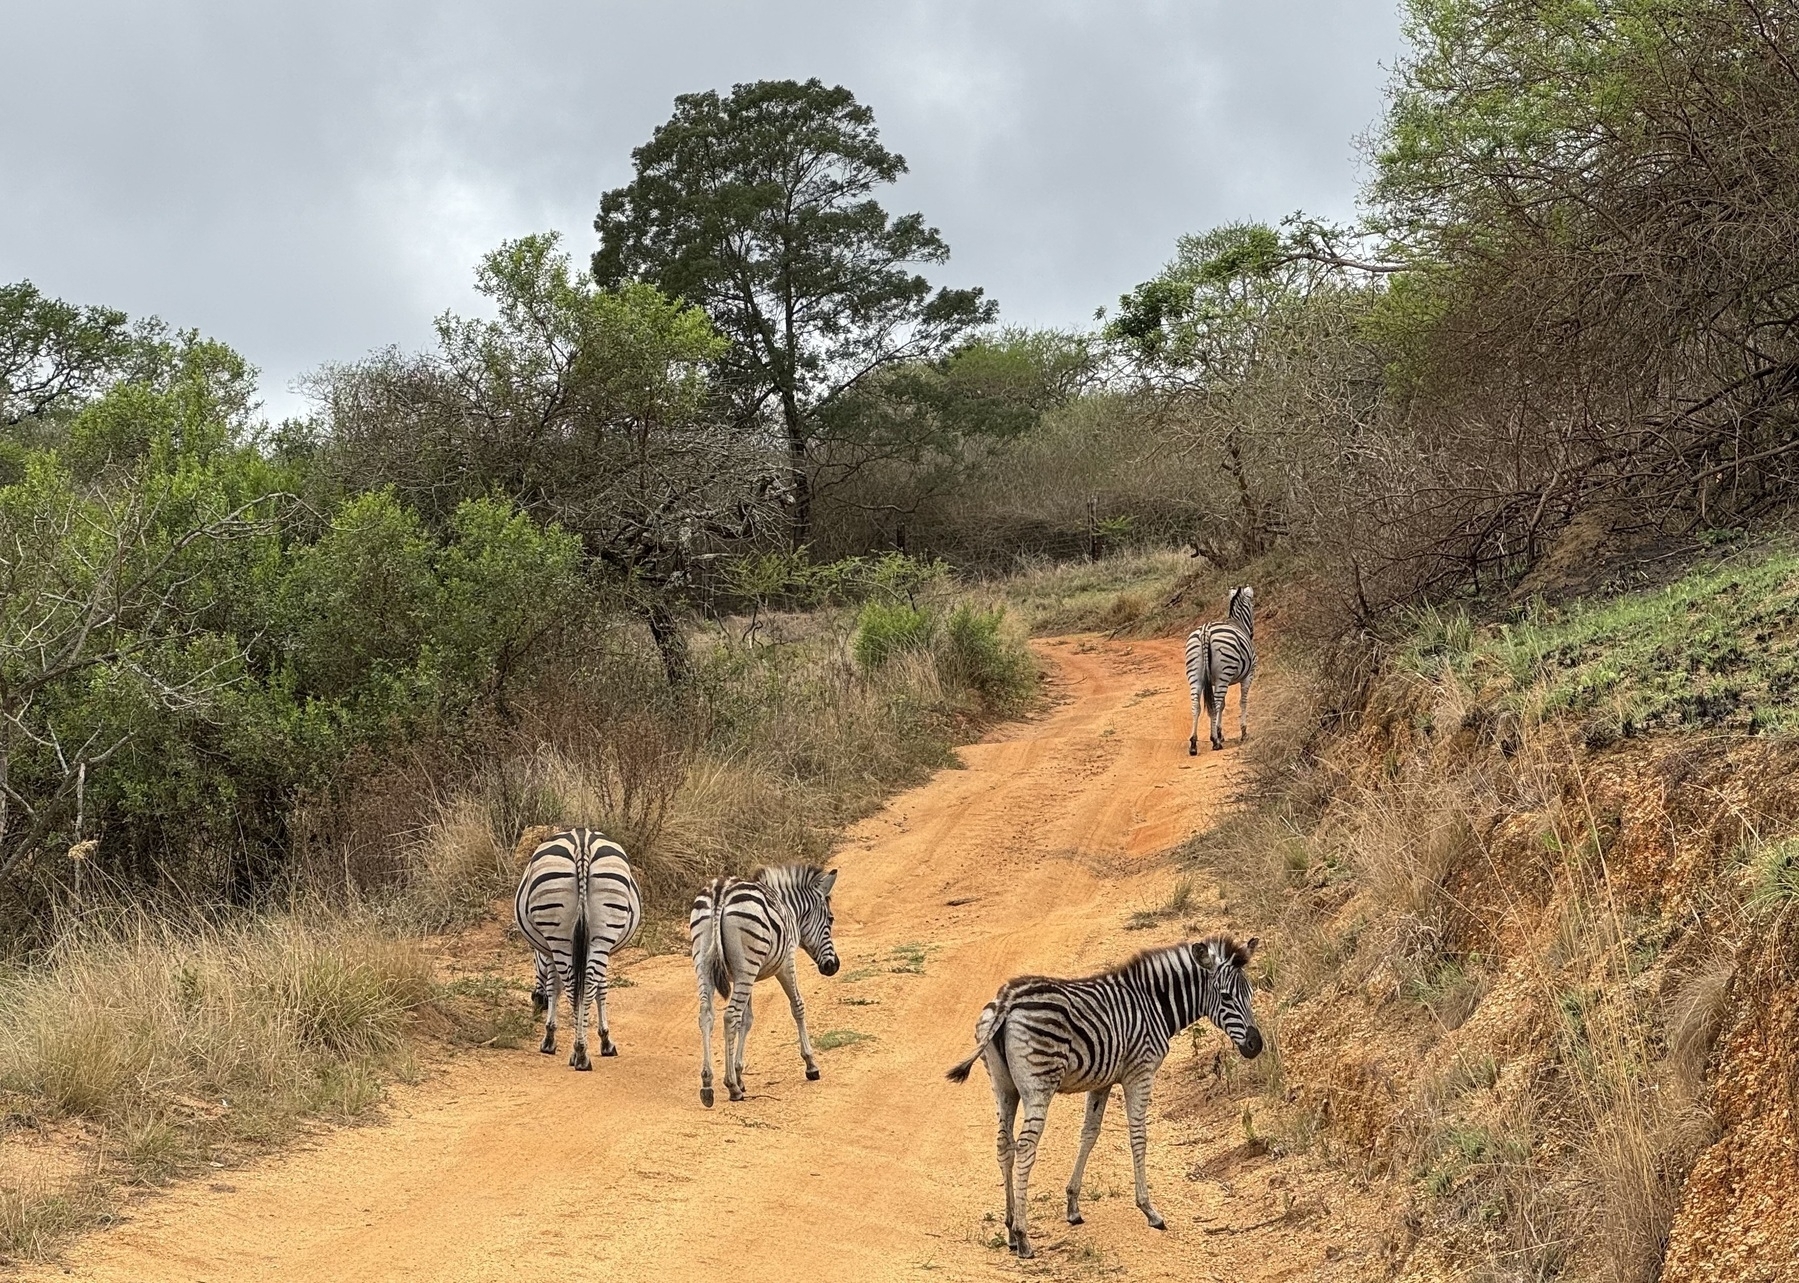 Four zebras wandering up a dirt road.